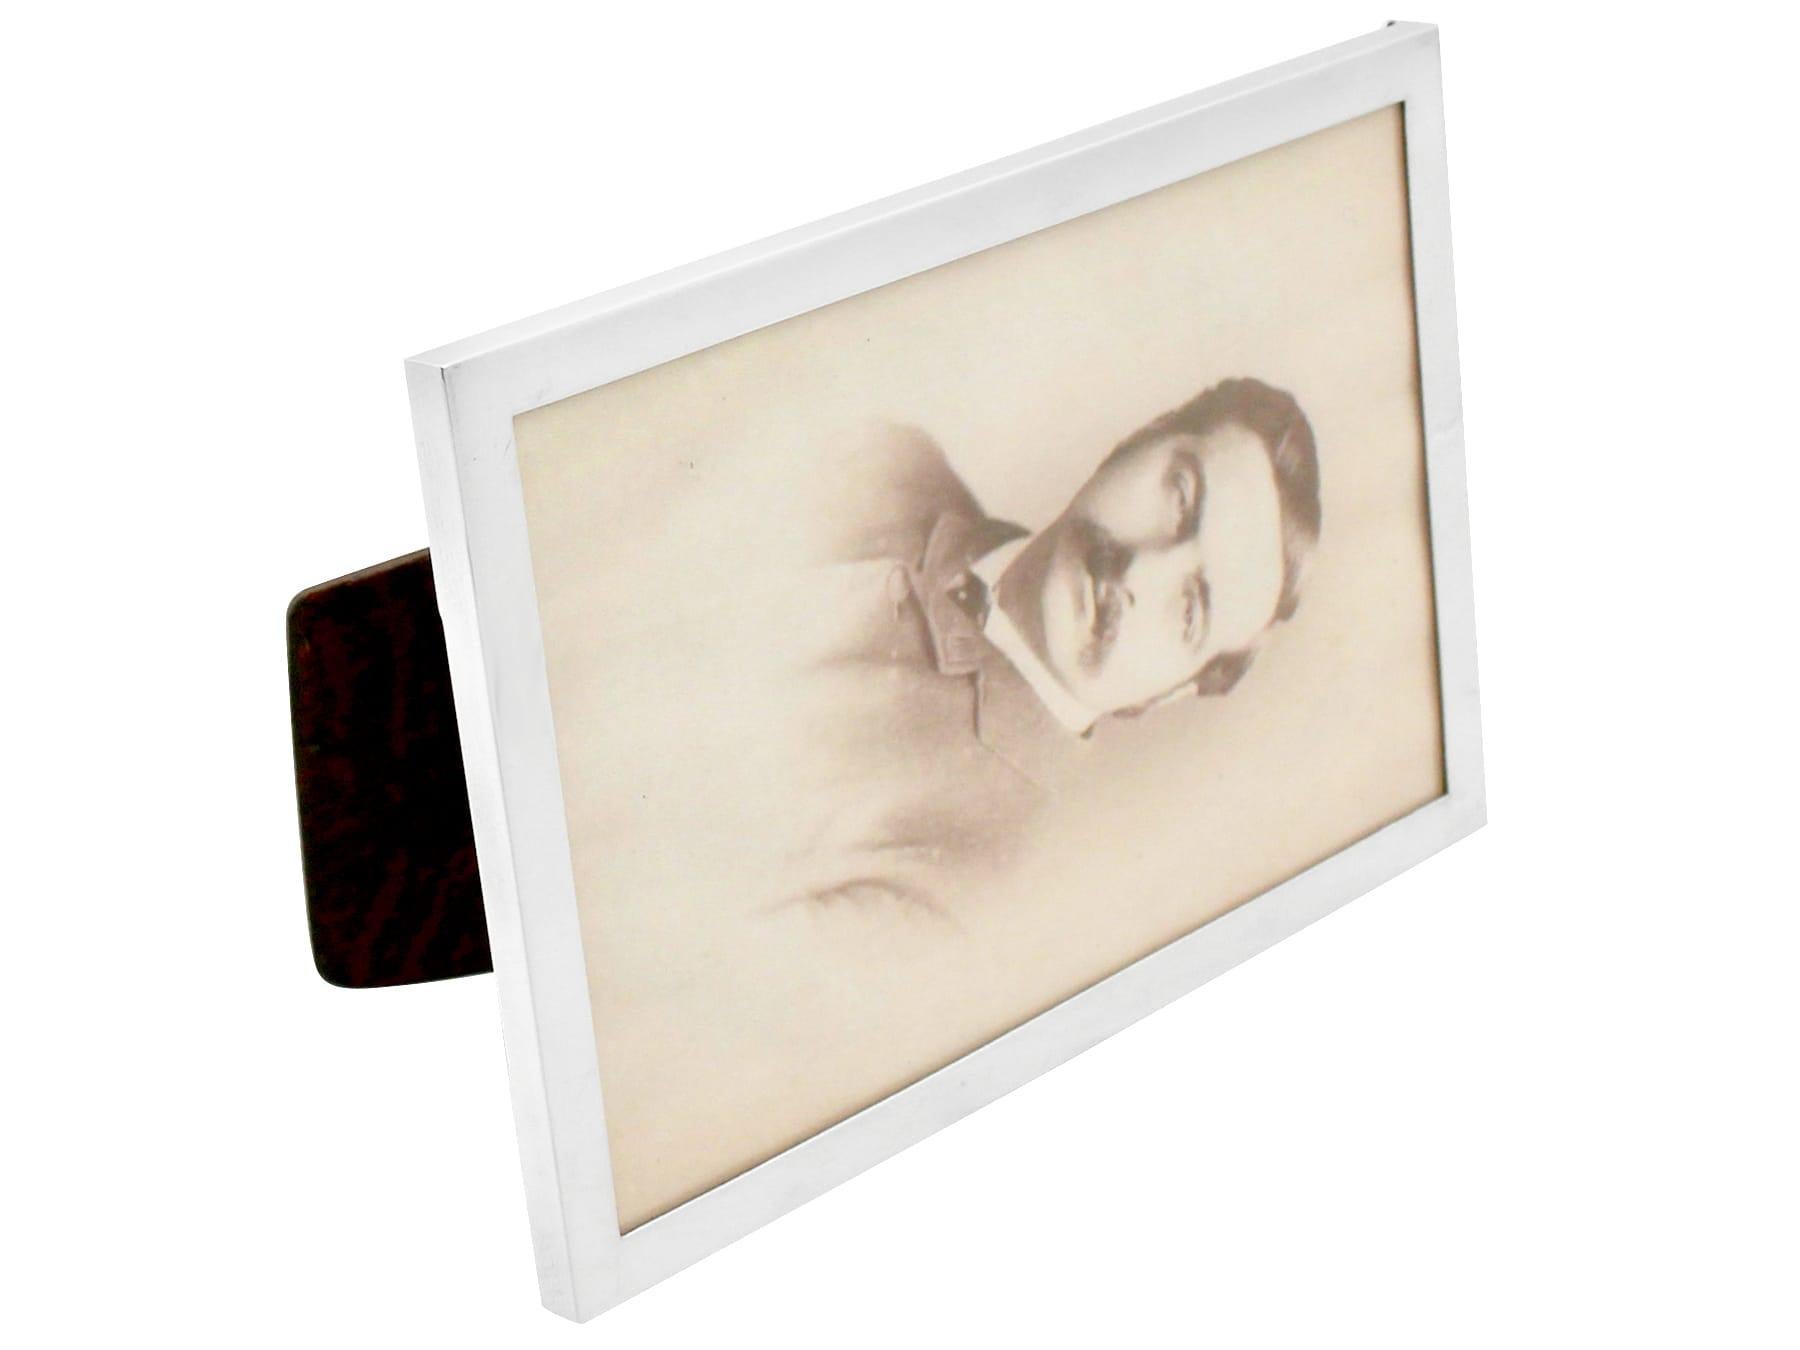 A fine and impressive vintage George VI English sterling silver photograph frame; an addition to our collection of ornamental silverware.

This exceptional vintage George VI sterling silver photograph frame has a plain rectangular form.

The